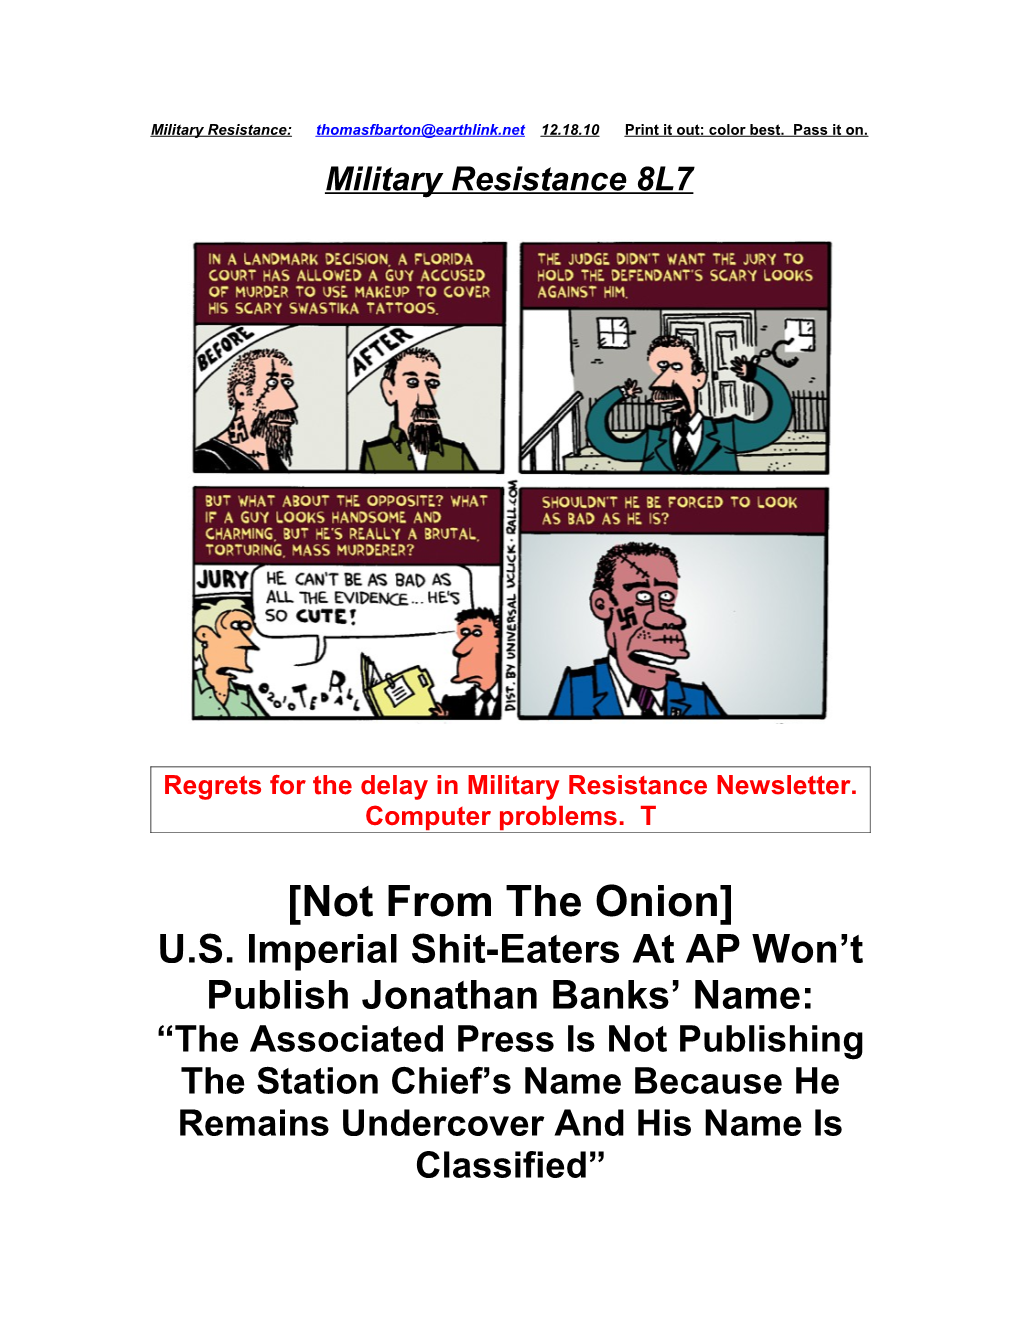 Regrets for the Delay in Military Resistance Newsletter. Computer Problems. T